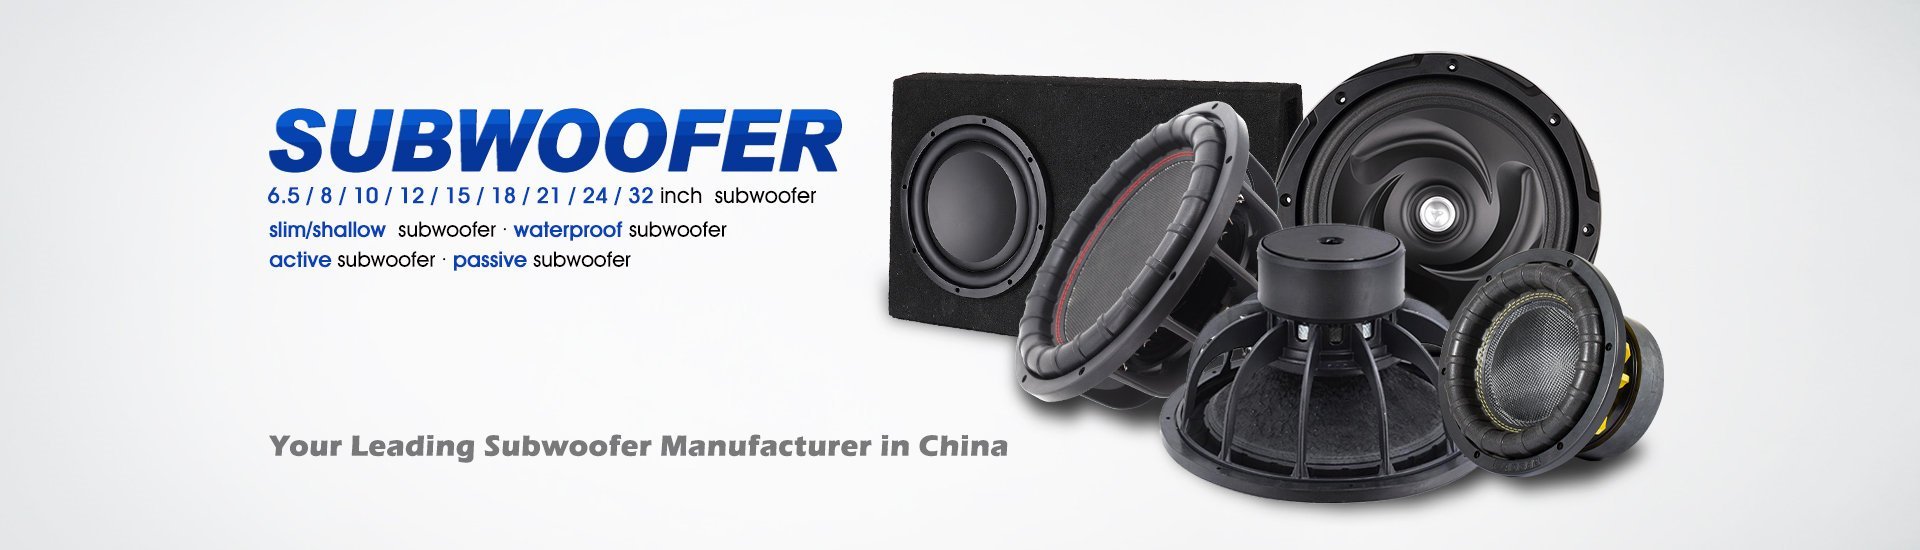 21-inch-subwoofer-manufacturer-in-china